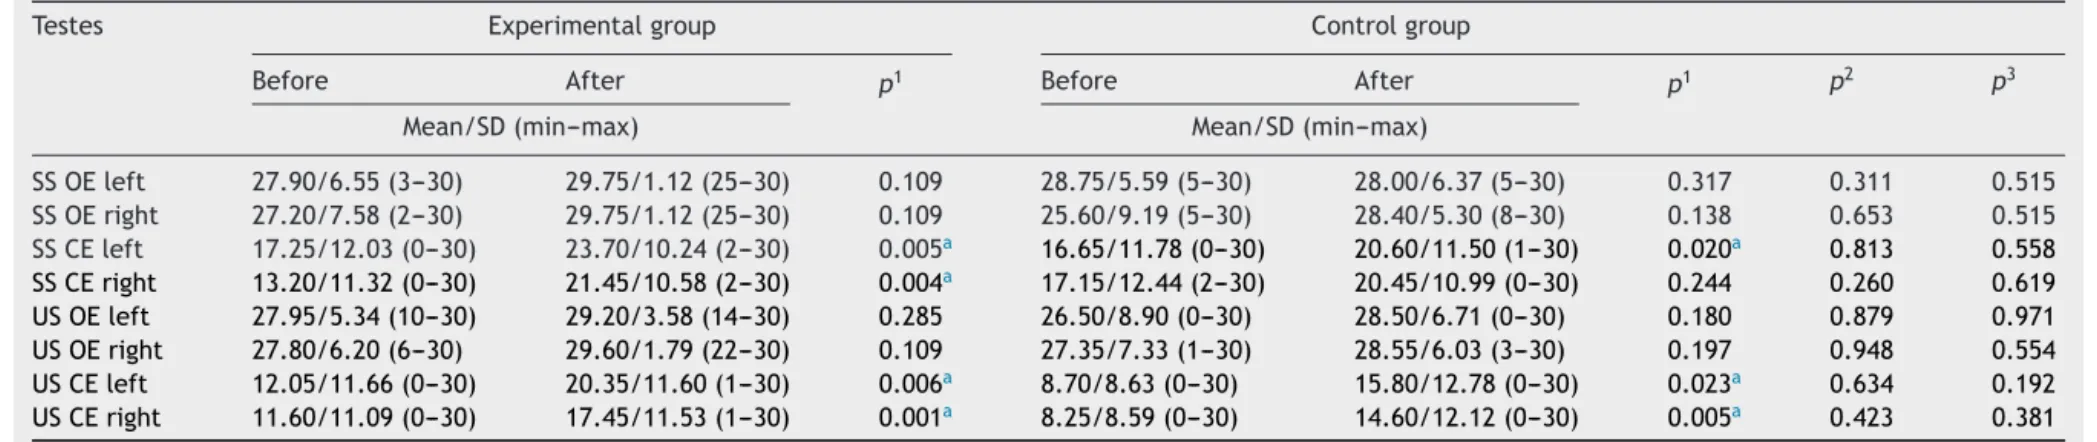 Table 3 Intragroup and intergroup comparison of the values in seconds during which patients from the experimental and the control groups remained in the sensitized Romberg static balance test position before and after the intervention.